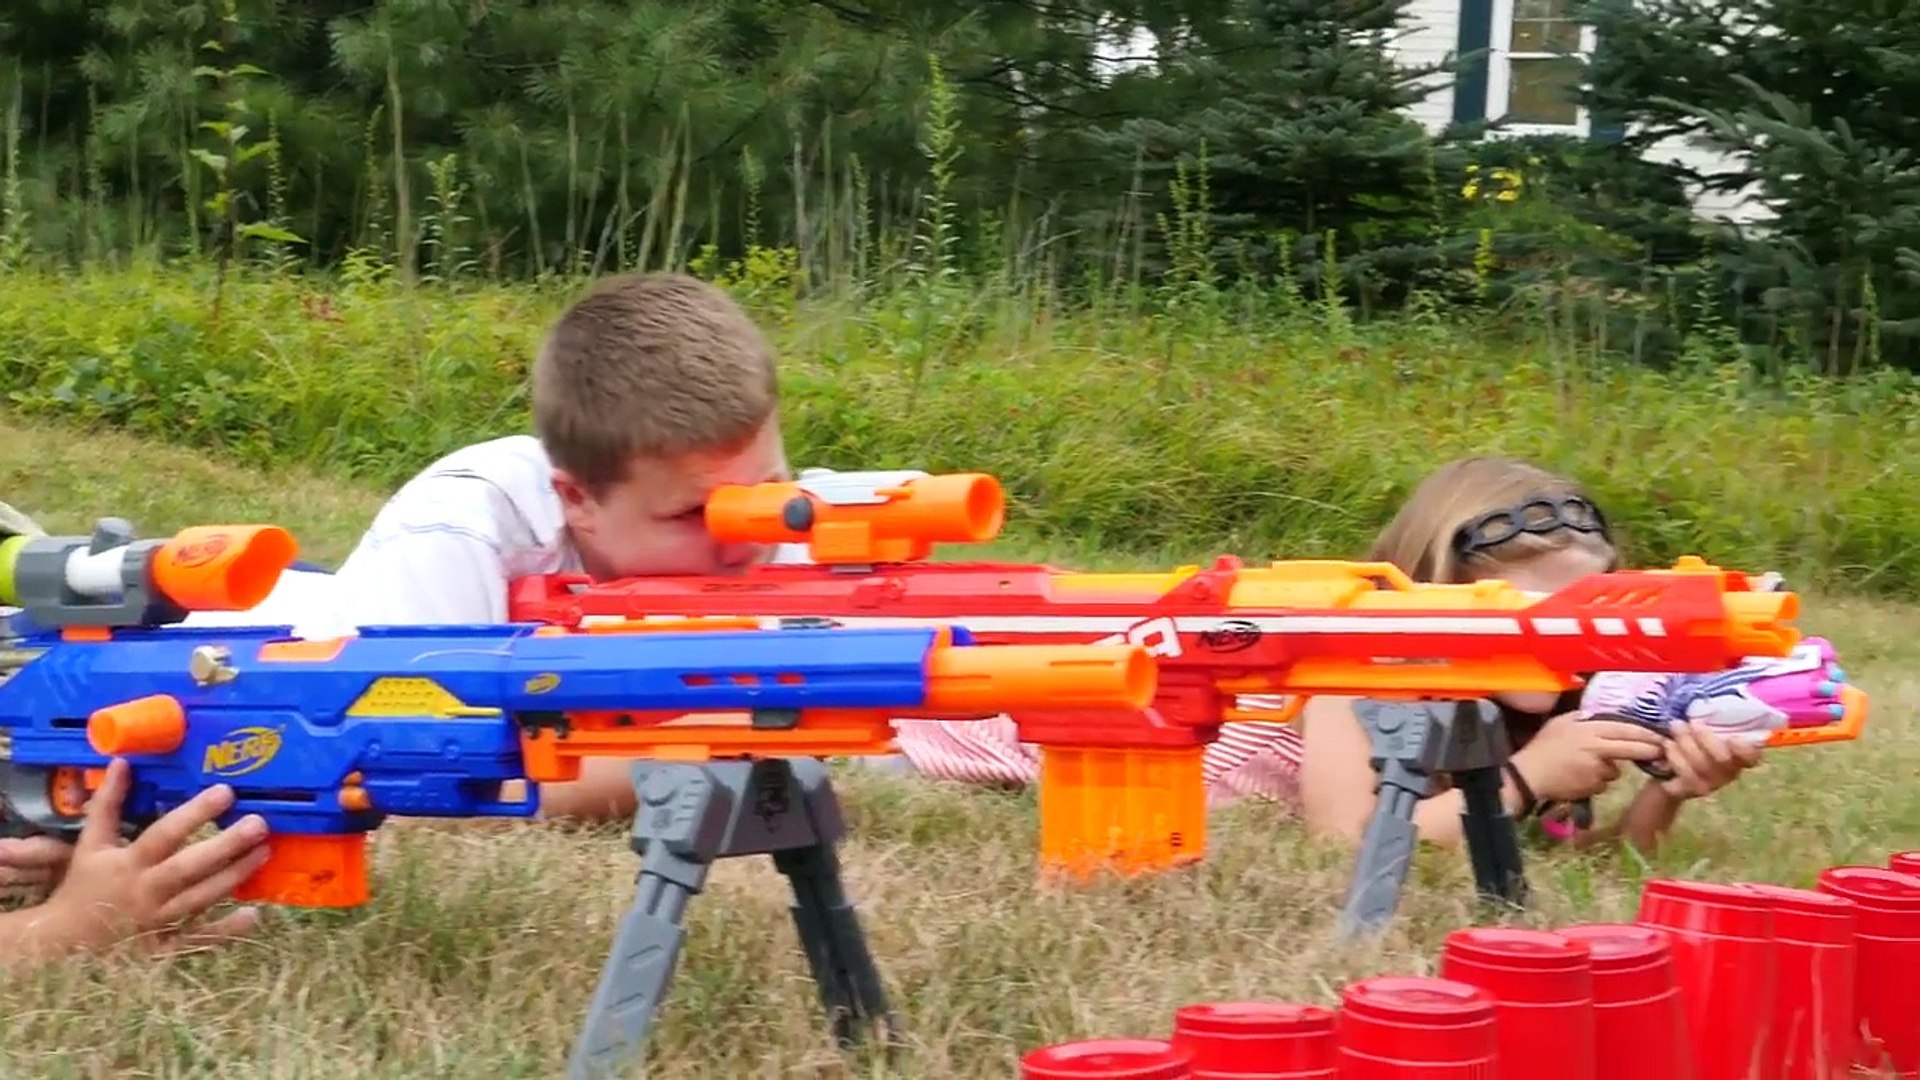 nerf videos twin toys